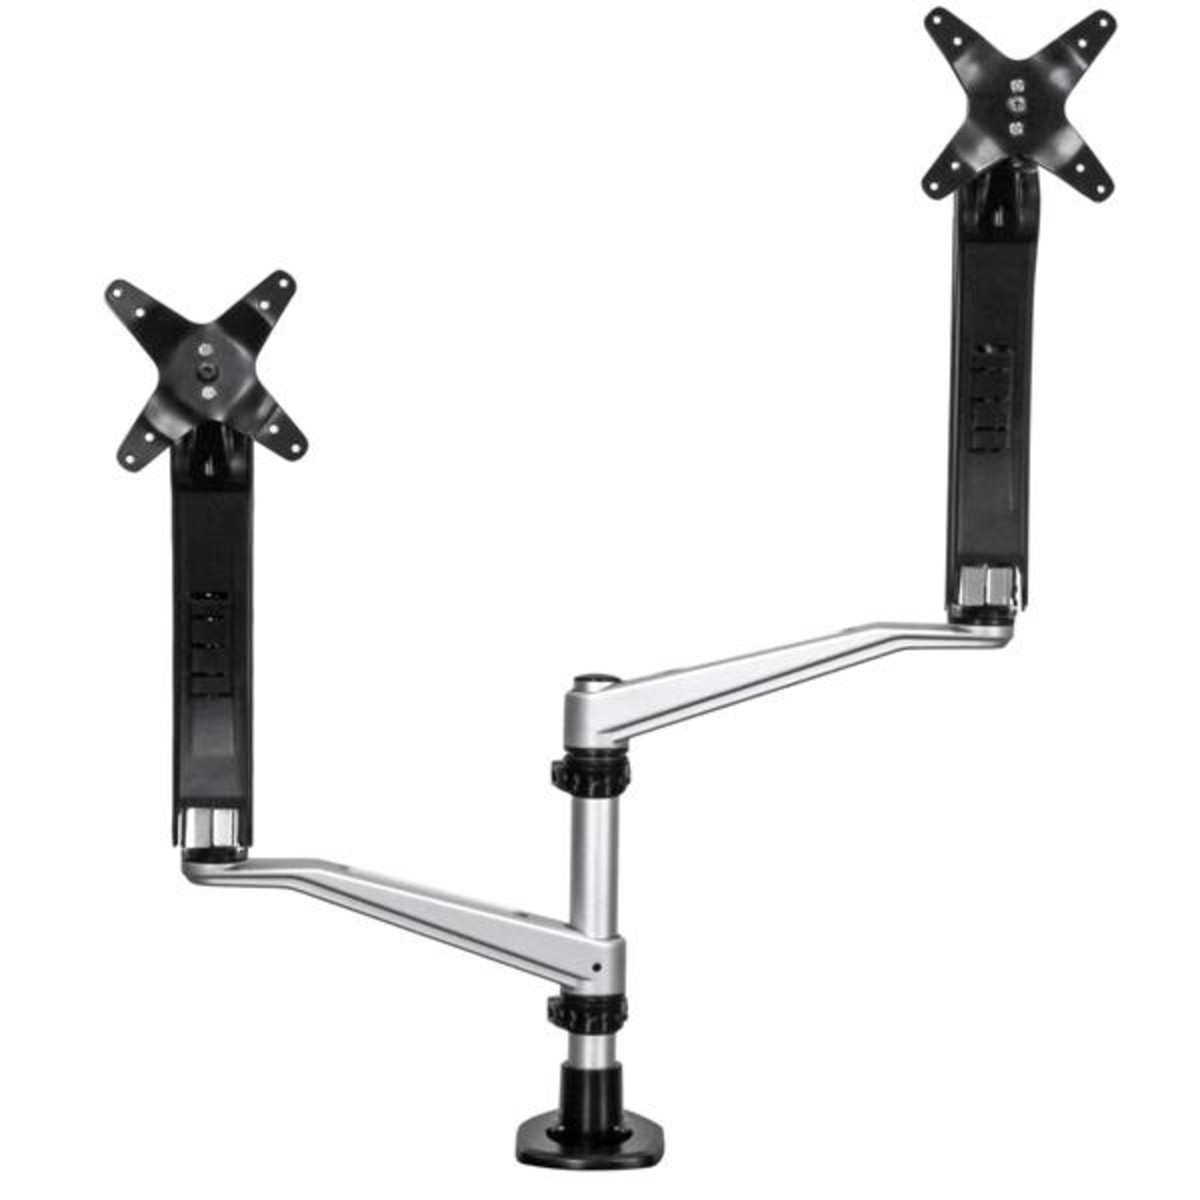 Dual Monitor Mount with Full-Motion Arms